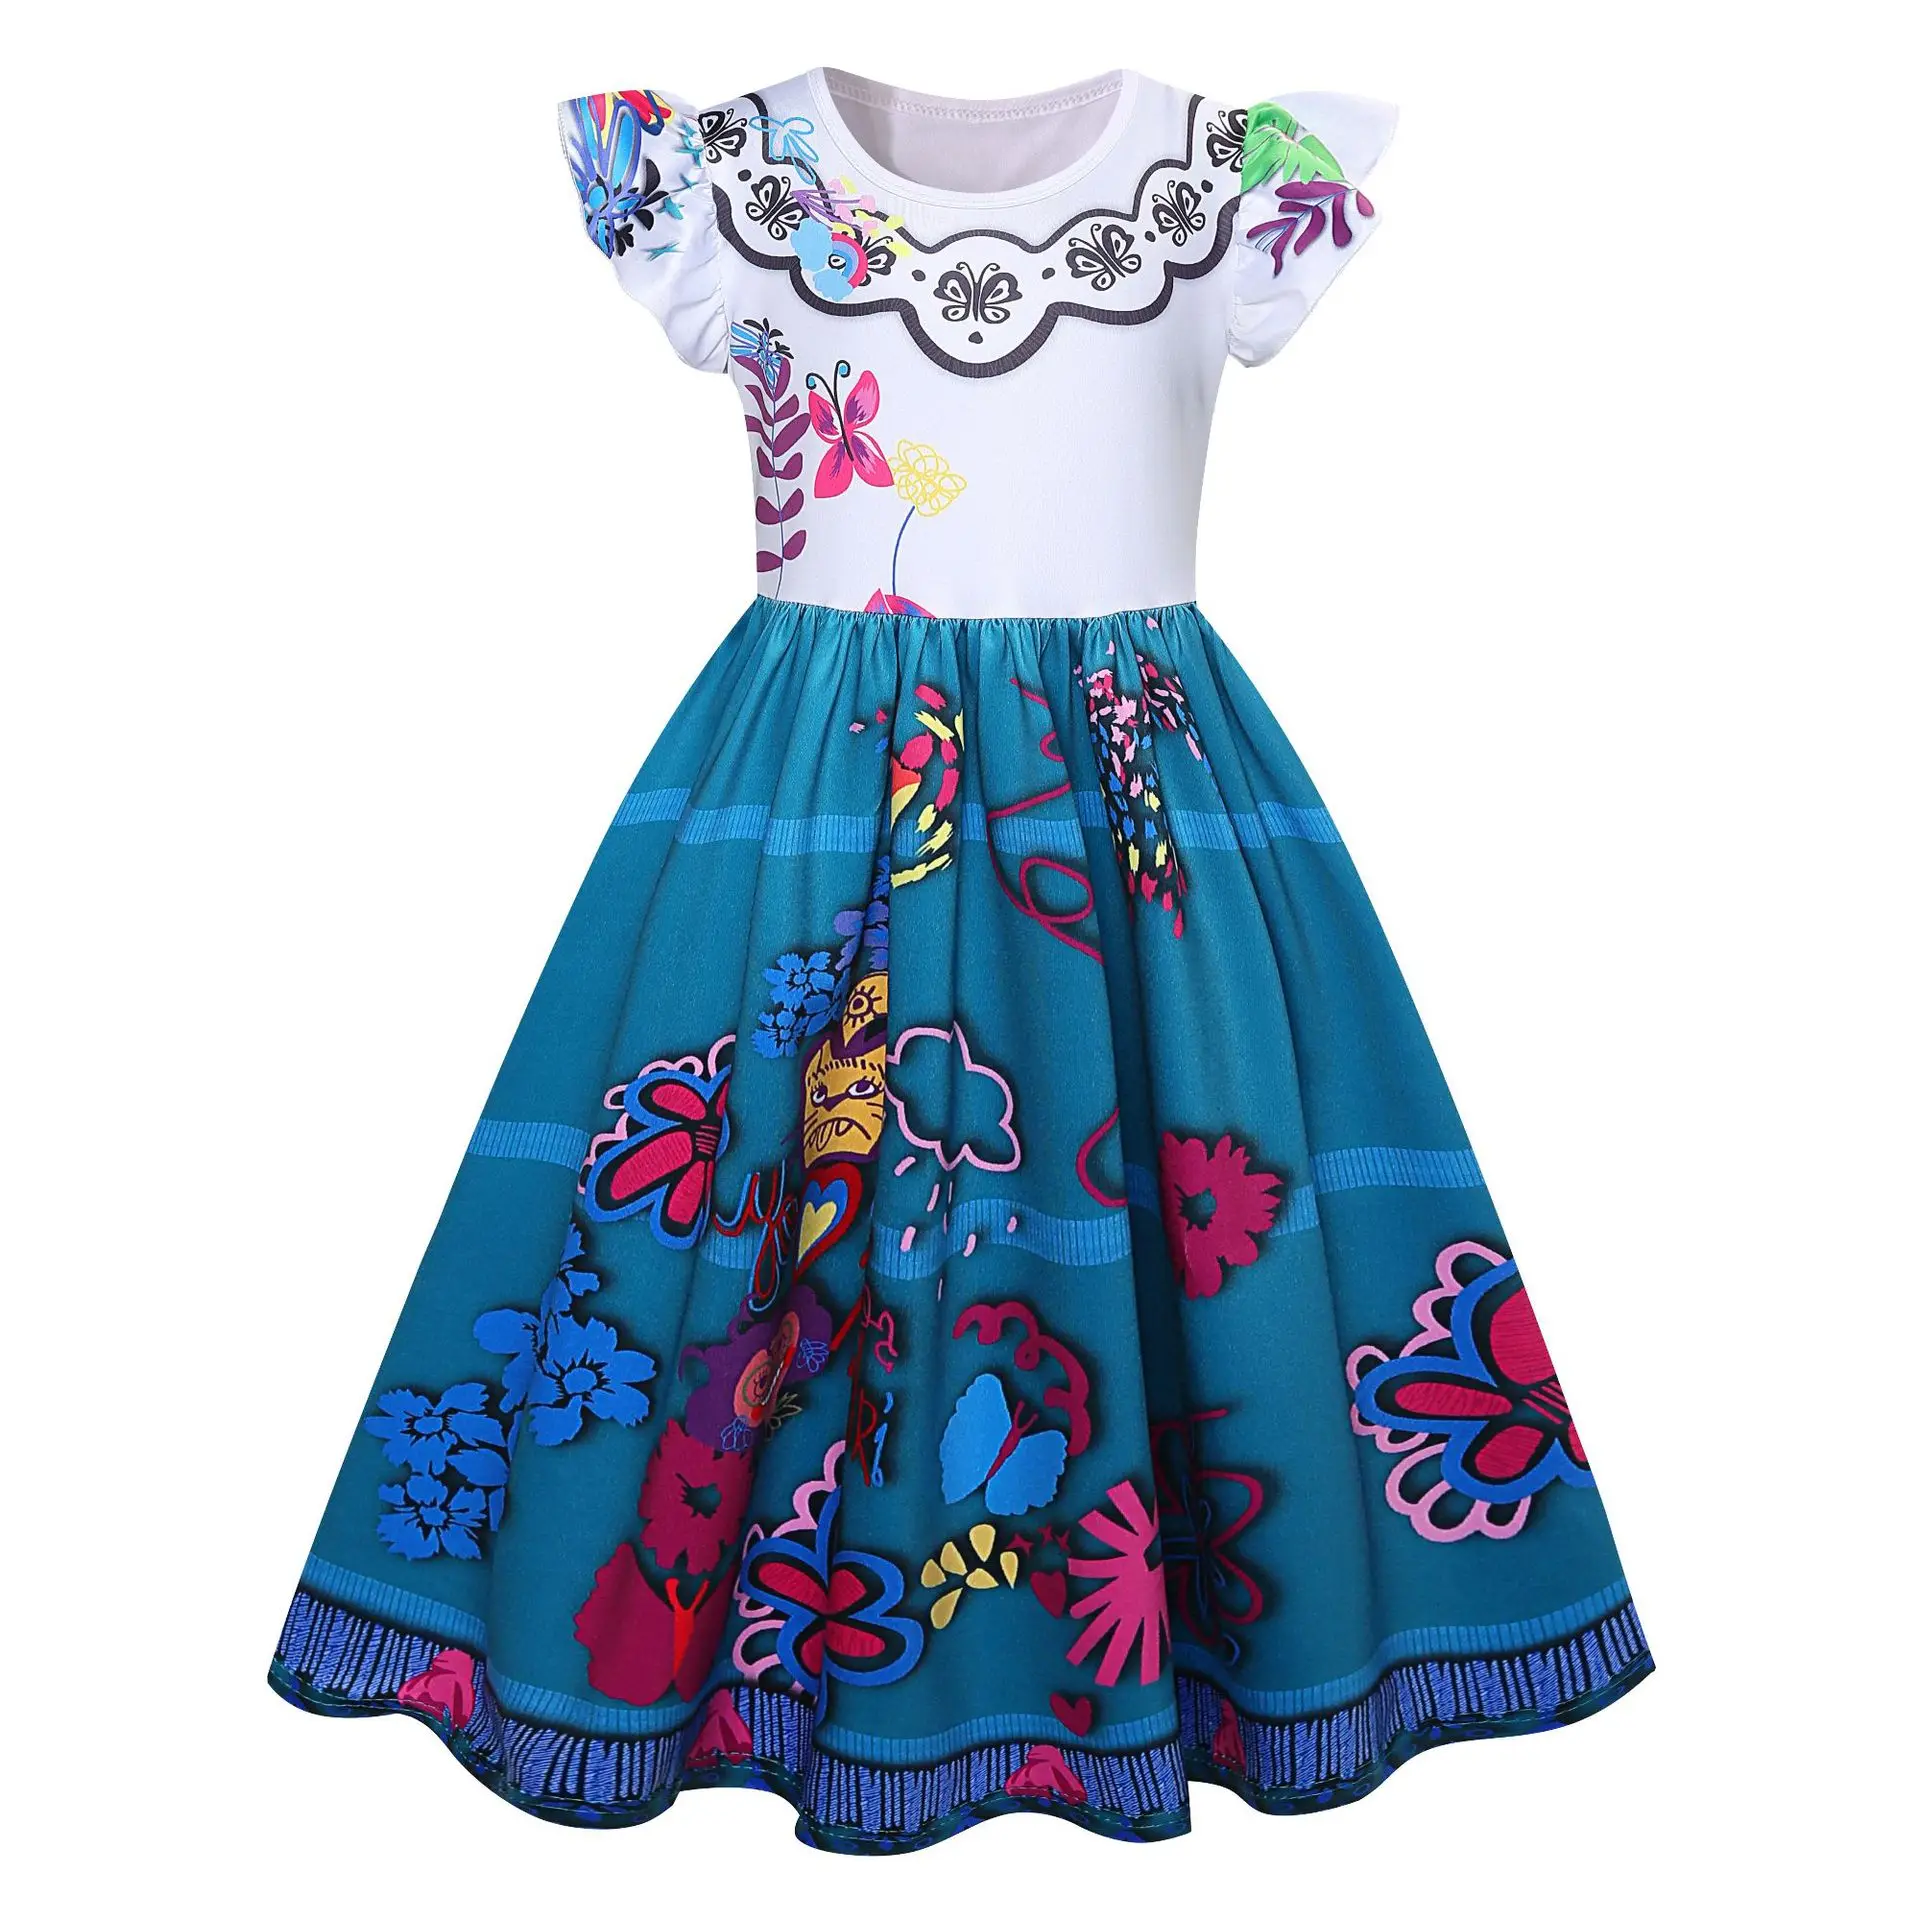 silk dress Girls Encanto Charm Dresses Carnival Summer New Children Princess Mirabel Dress Birthday Party Role Play Costume Kids Prom Gowns frock designs